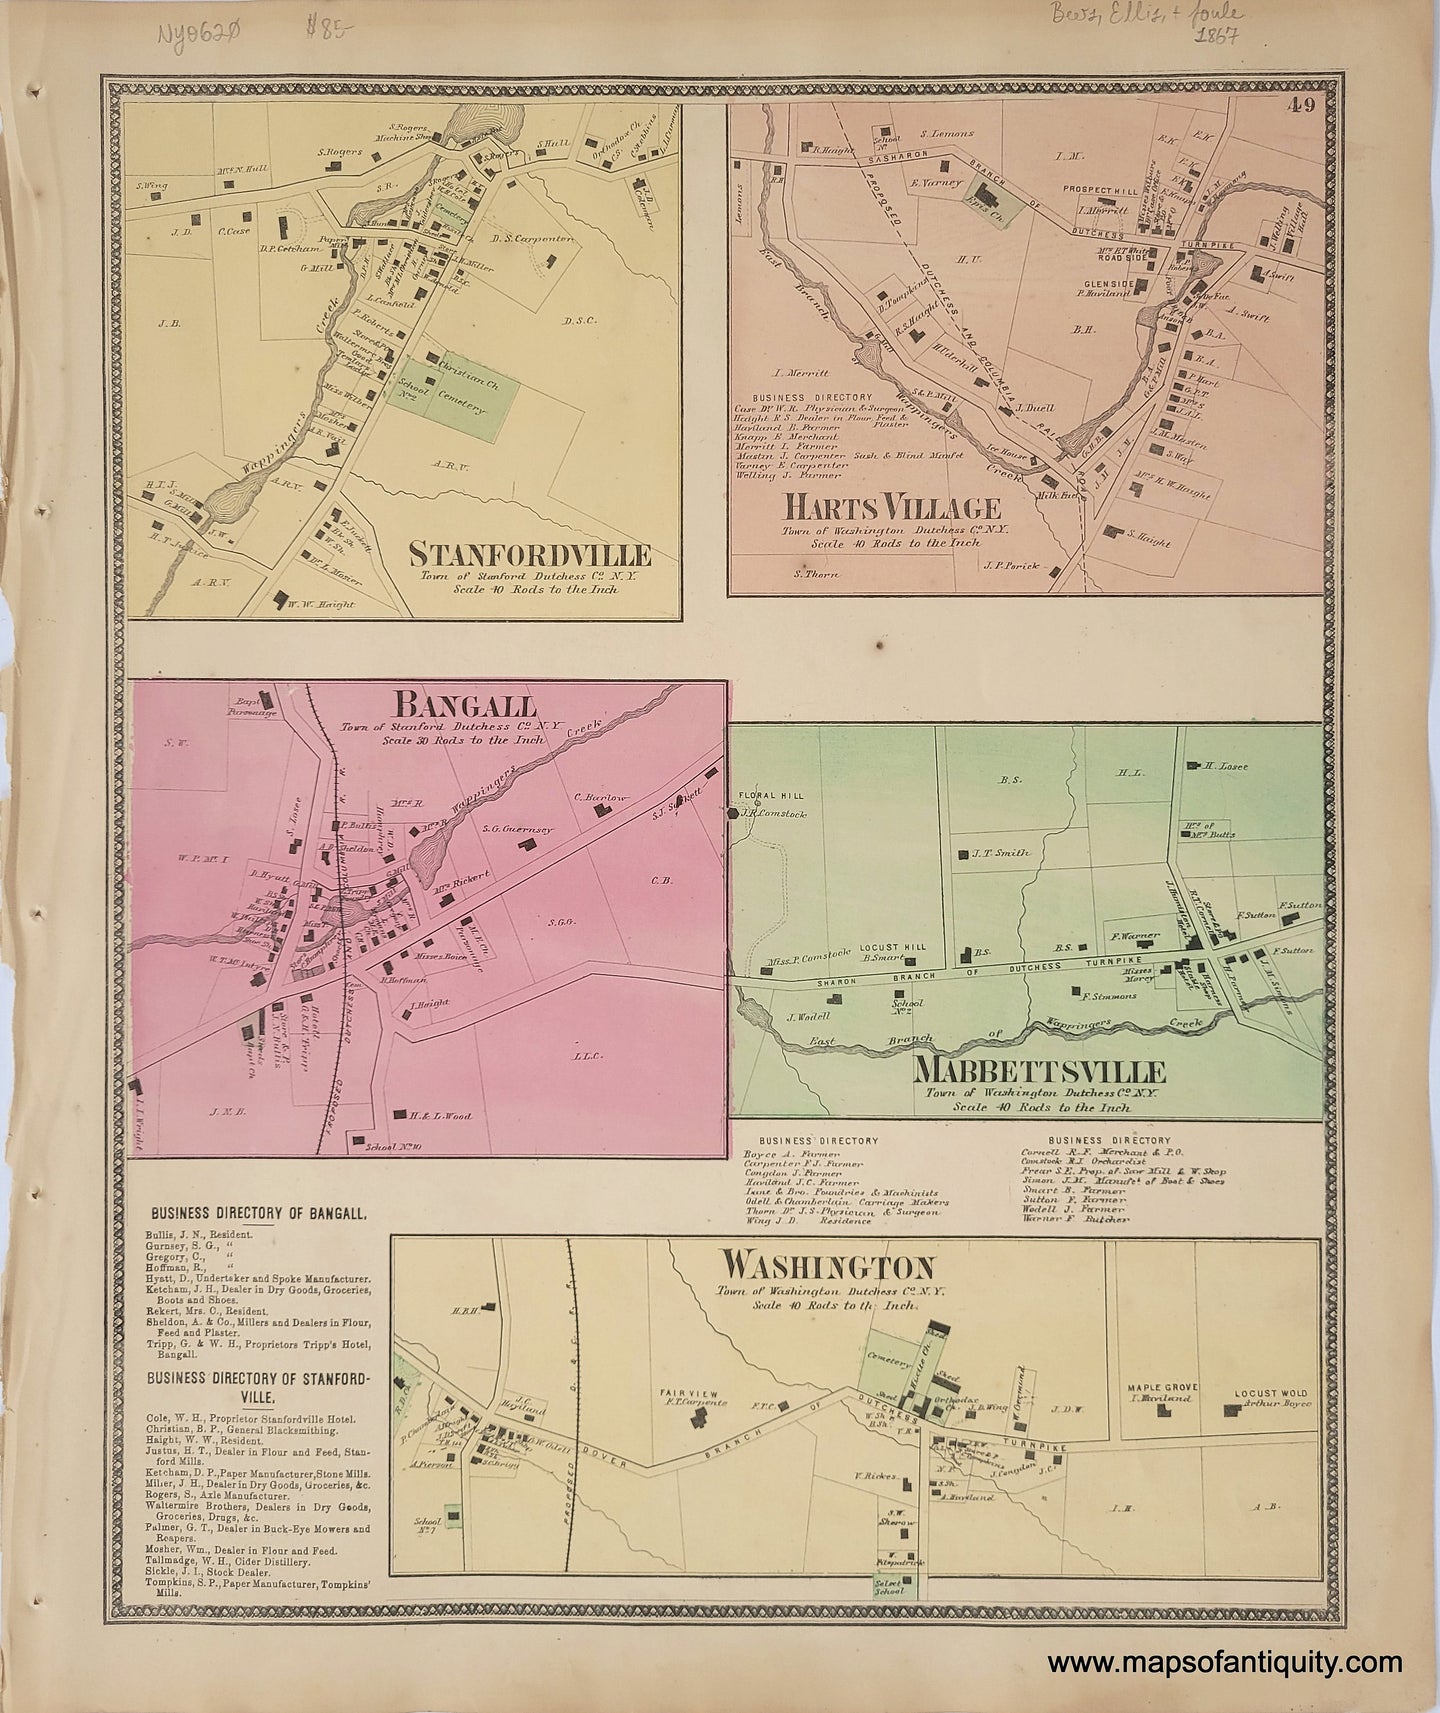 Antique-Hand-Colored-Map-Stanfordville-Harts-Village-Bangall-Mabbettsville-and-Washington-(NY)-United-States-New-York-1867-Beers-Ellis-and-Soule-Maps-Of-Antiquity